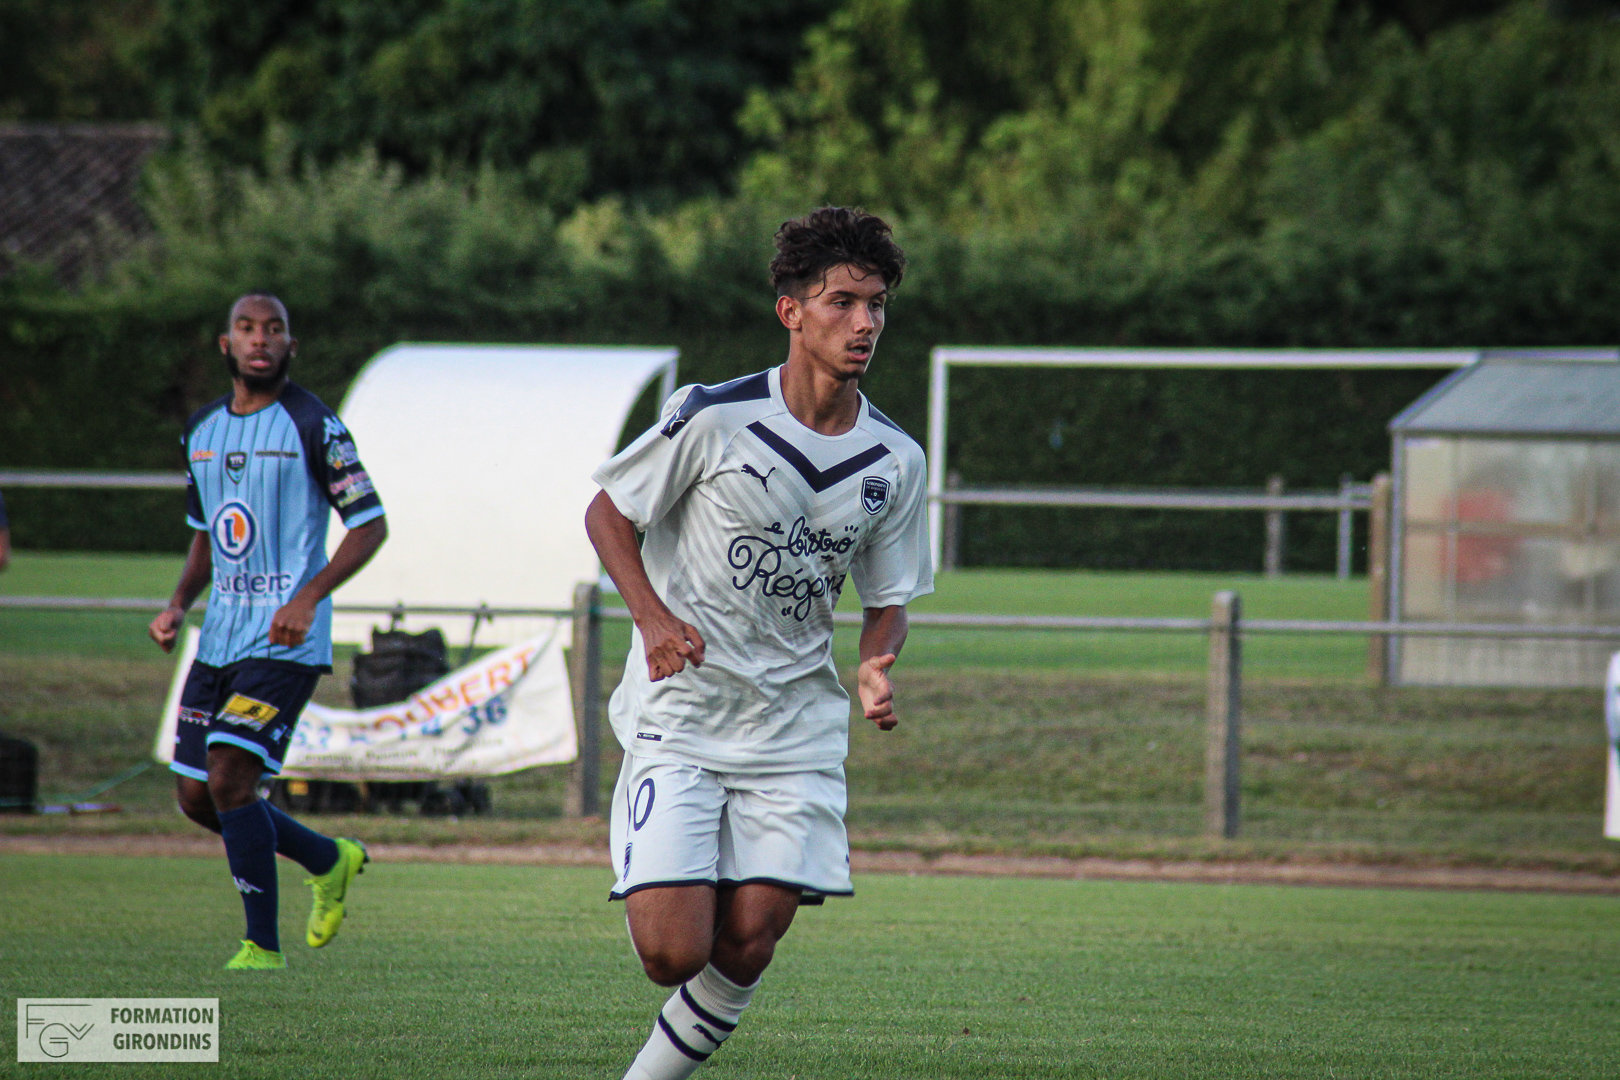 Cfa Girondins : Match nul in extremis à Bergerac - Formation Girondins 